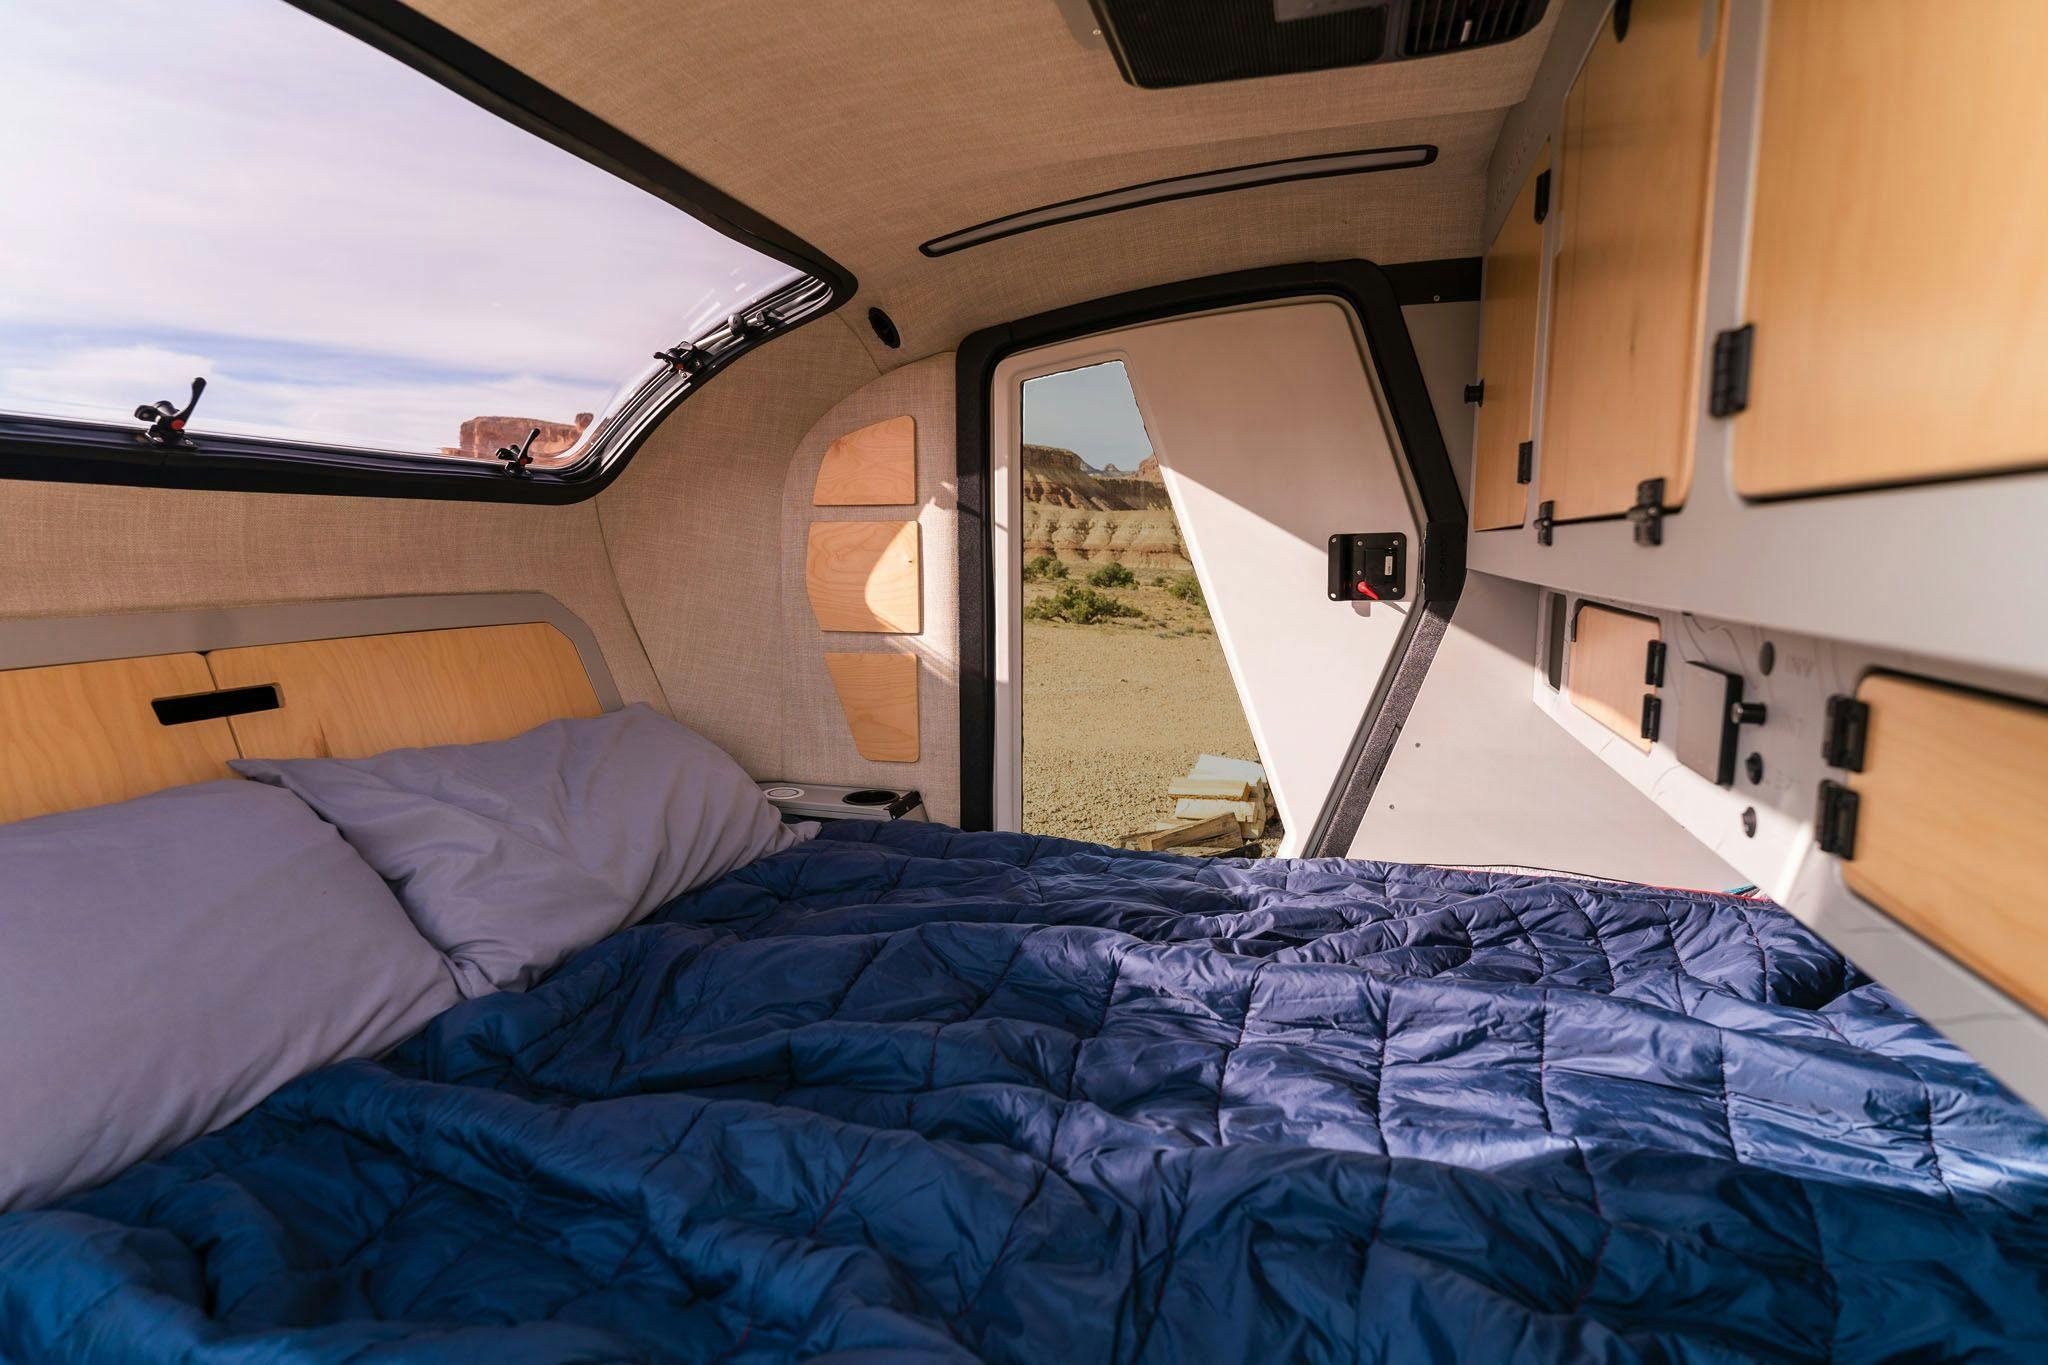 The interior of the TOPO2 Cabin, a teardrop trailer, that features a queen sized mattress, tons of storage, A/C, heat, and a stargazer window.